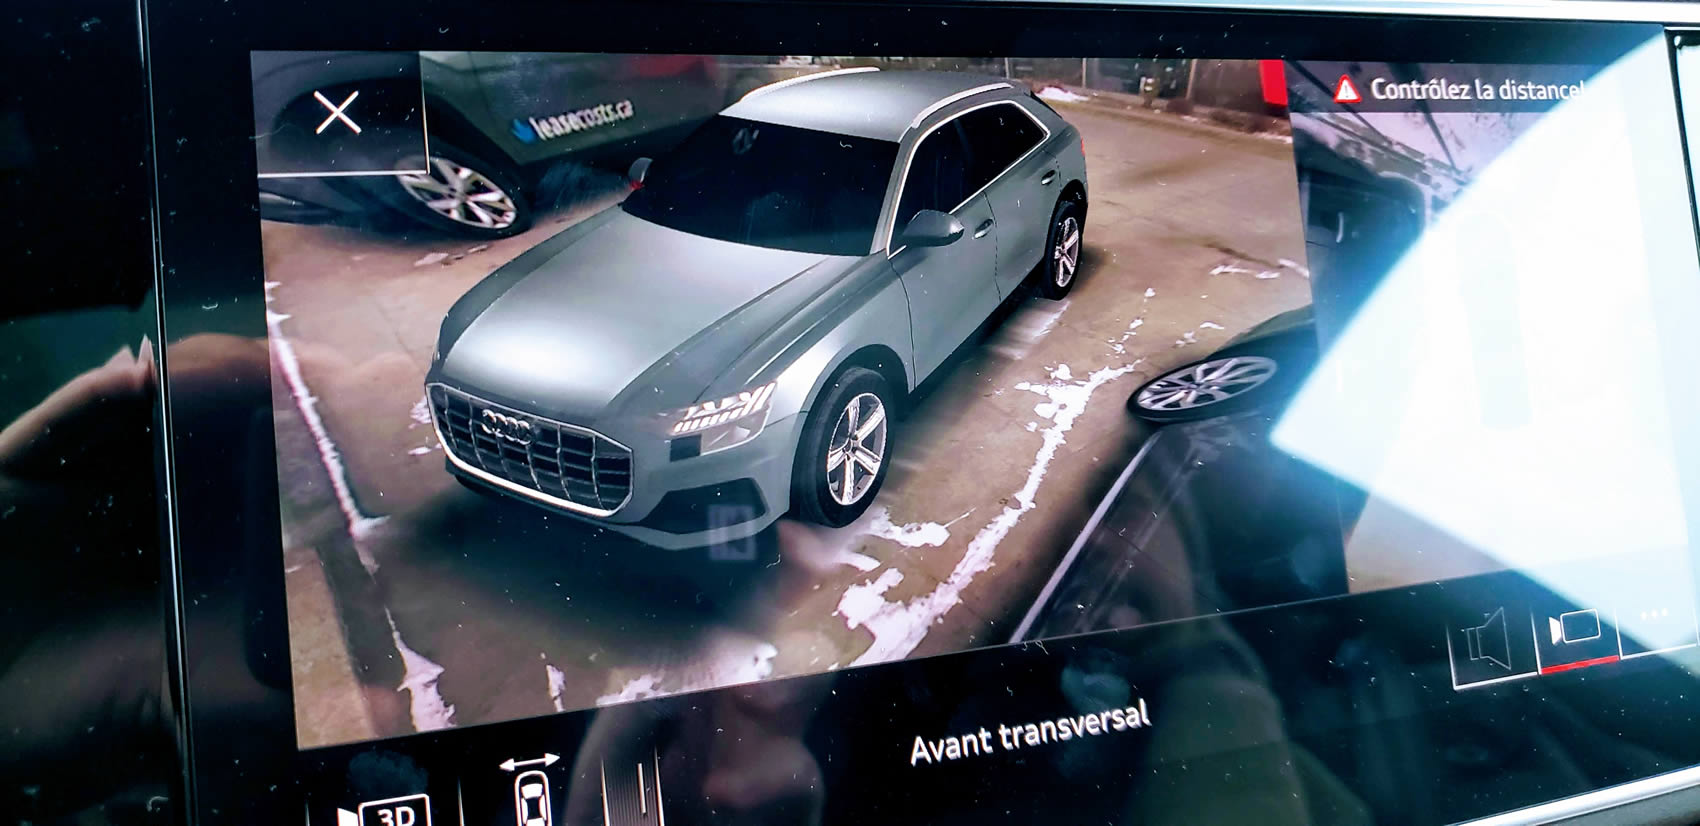 Test Driving the All-new Audi Q8 in Montreal: 360 View with 3D Model